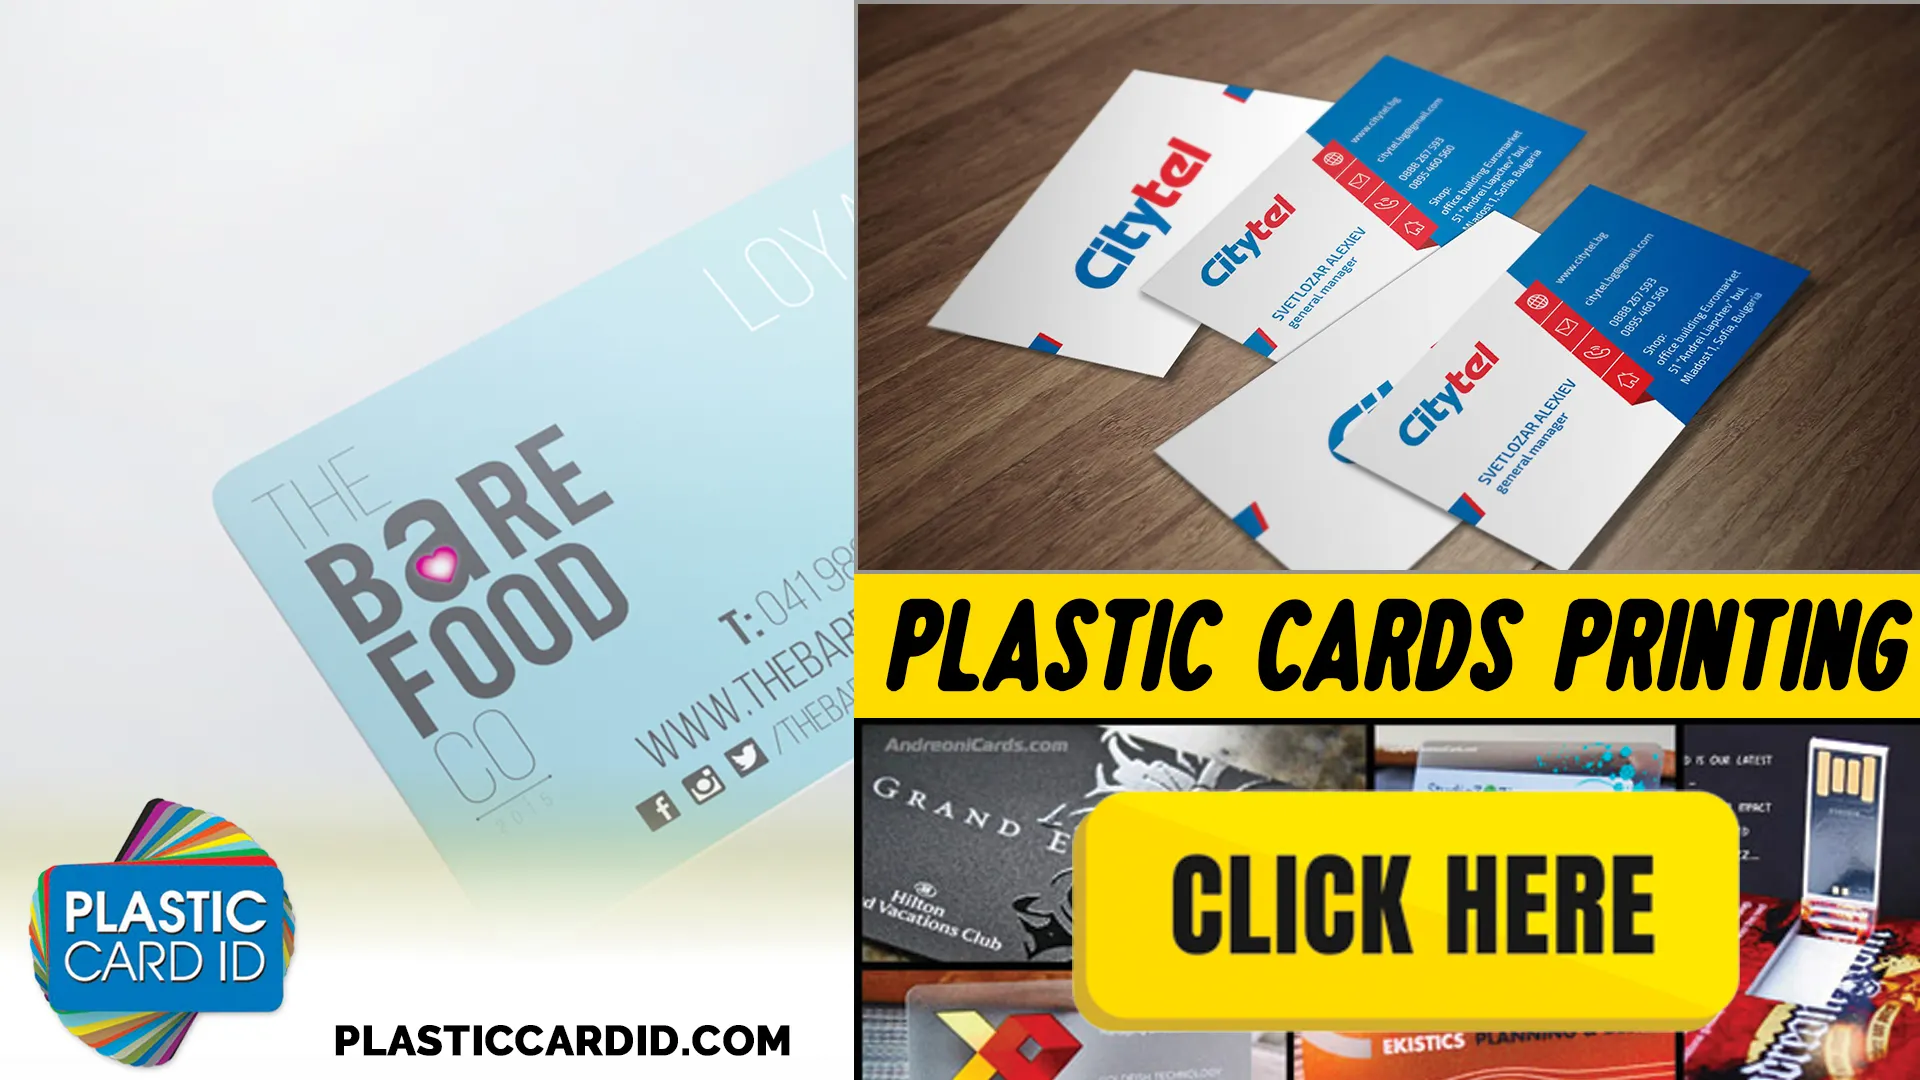 Customizable Plastic Cards: The Canvas for Your Creativity